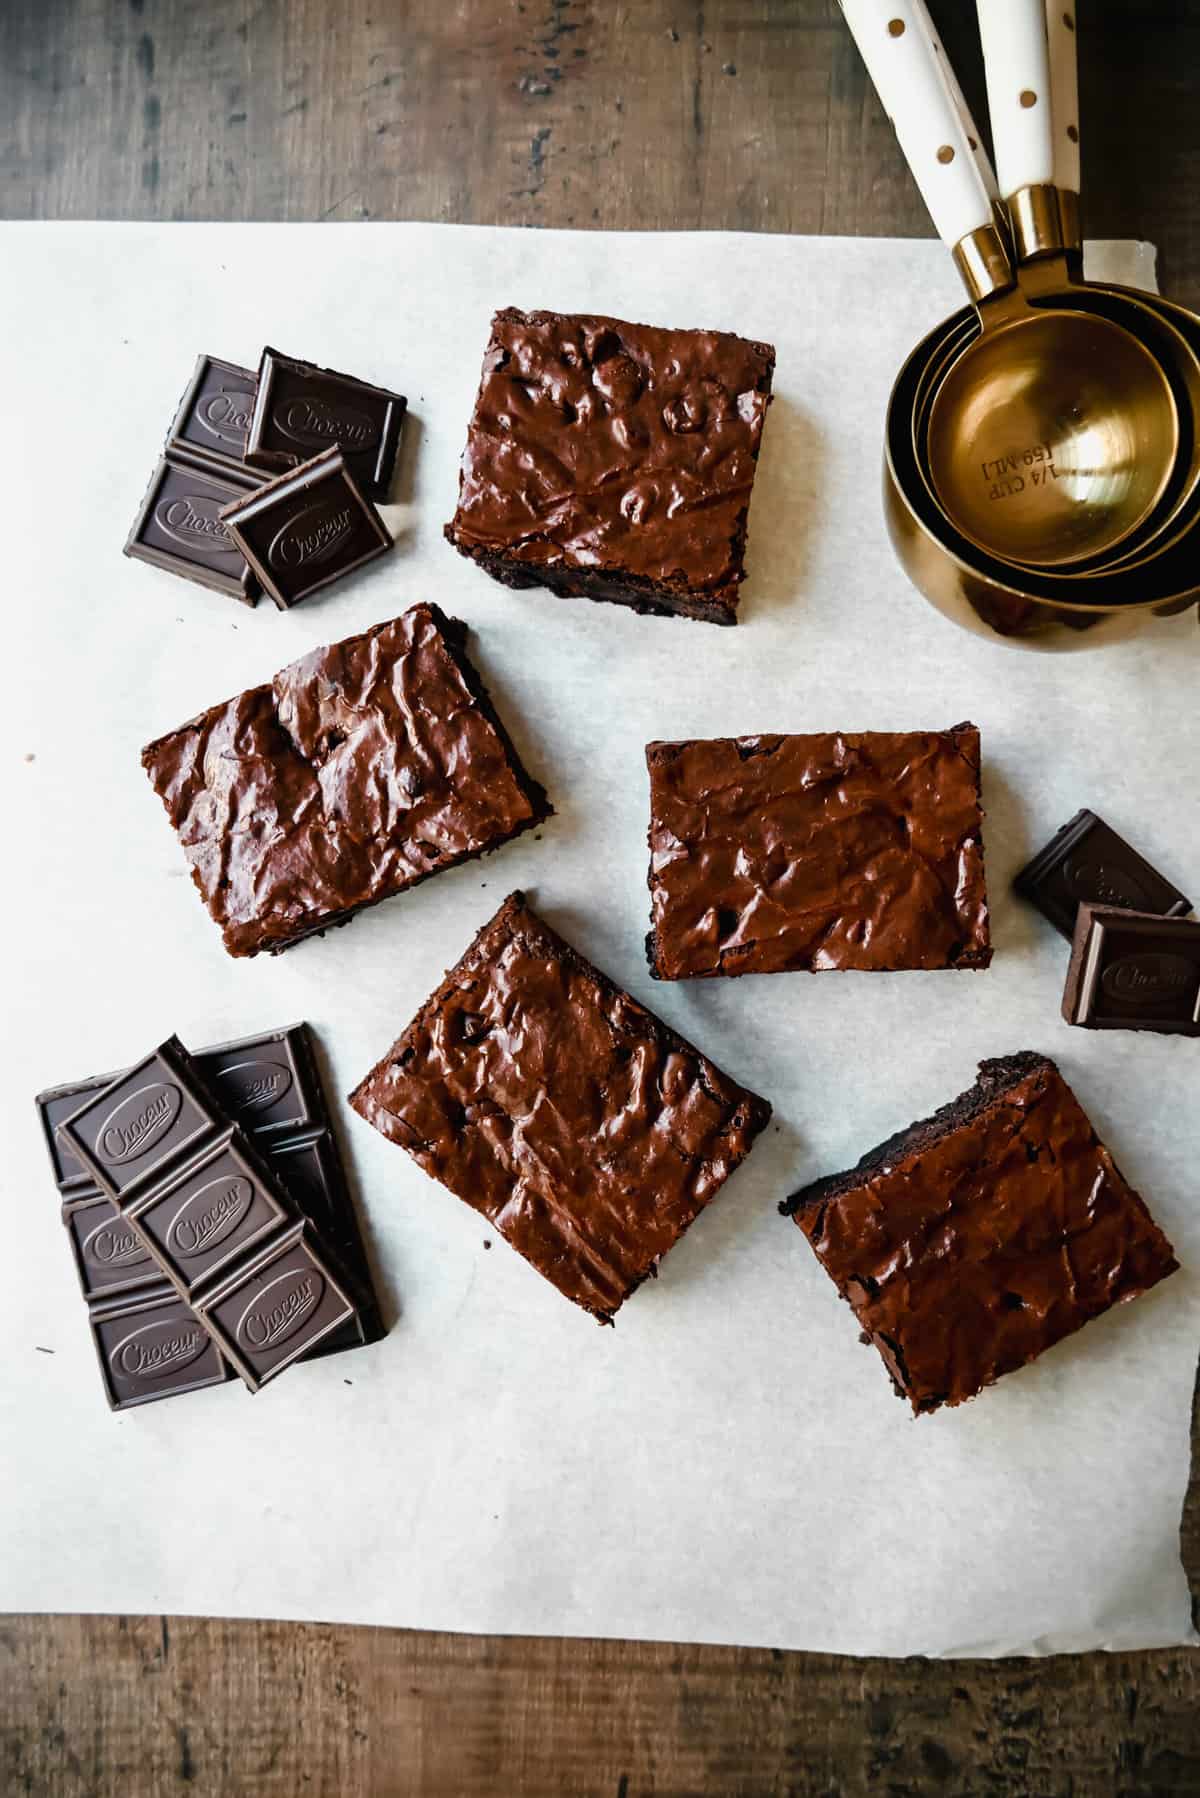 Brown Butter Brownies. The most fudgy, chewy chocolate brownies made with brown butter to make them even better! Everyone always asks for this easy homemade brownie recipe.